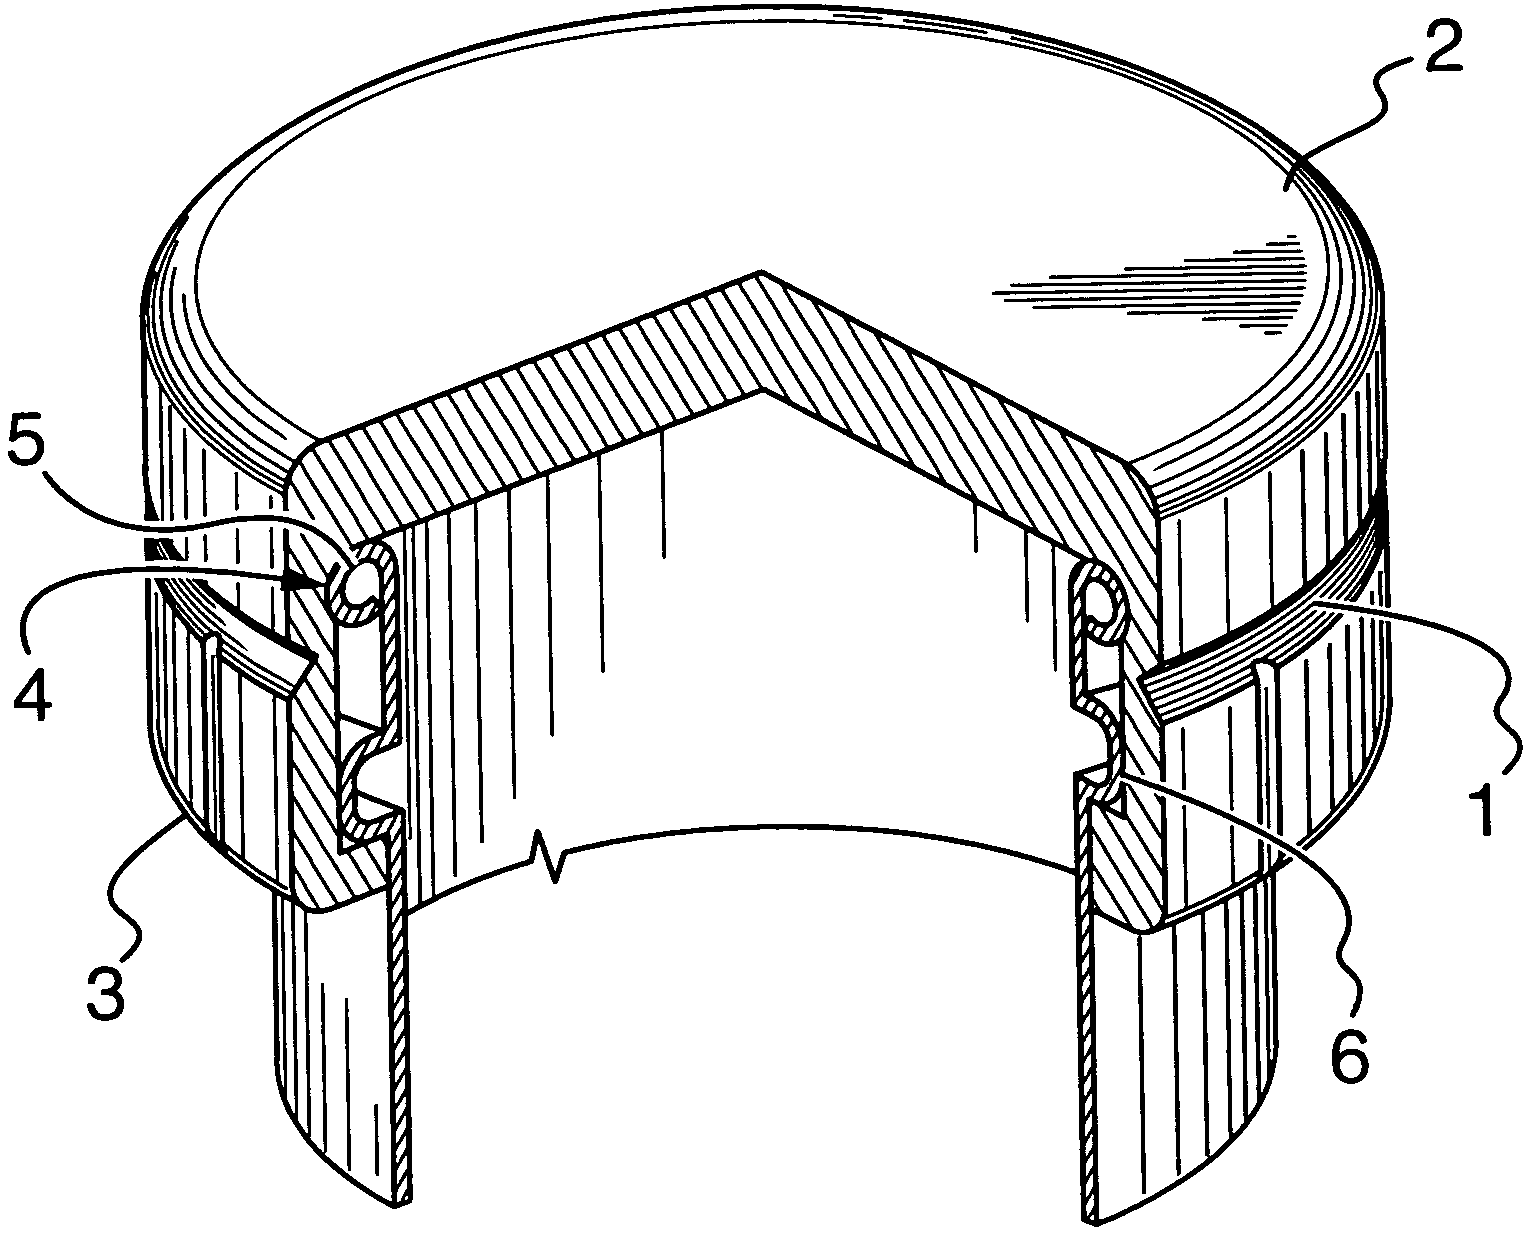 Snap-top closure device